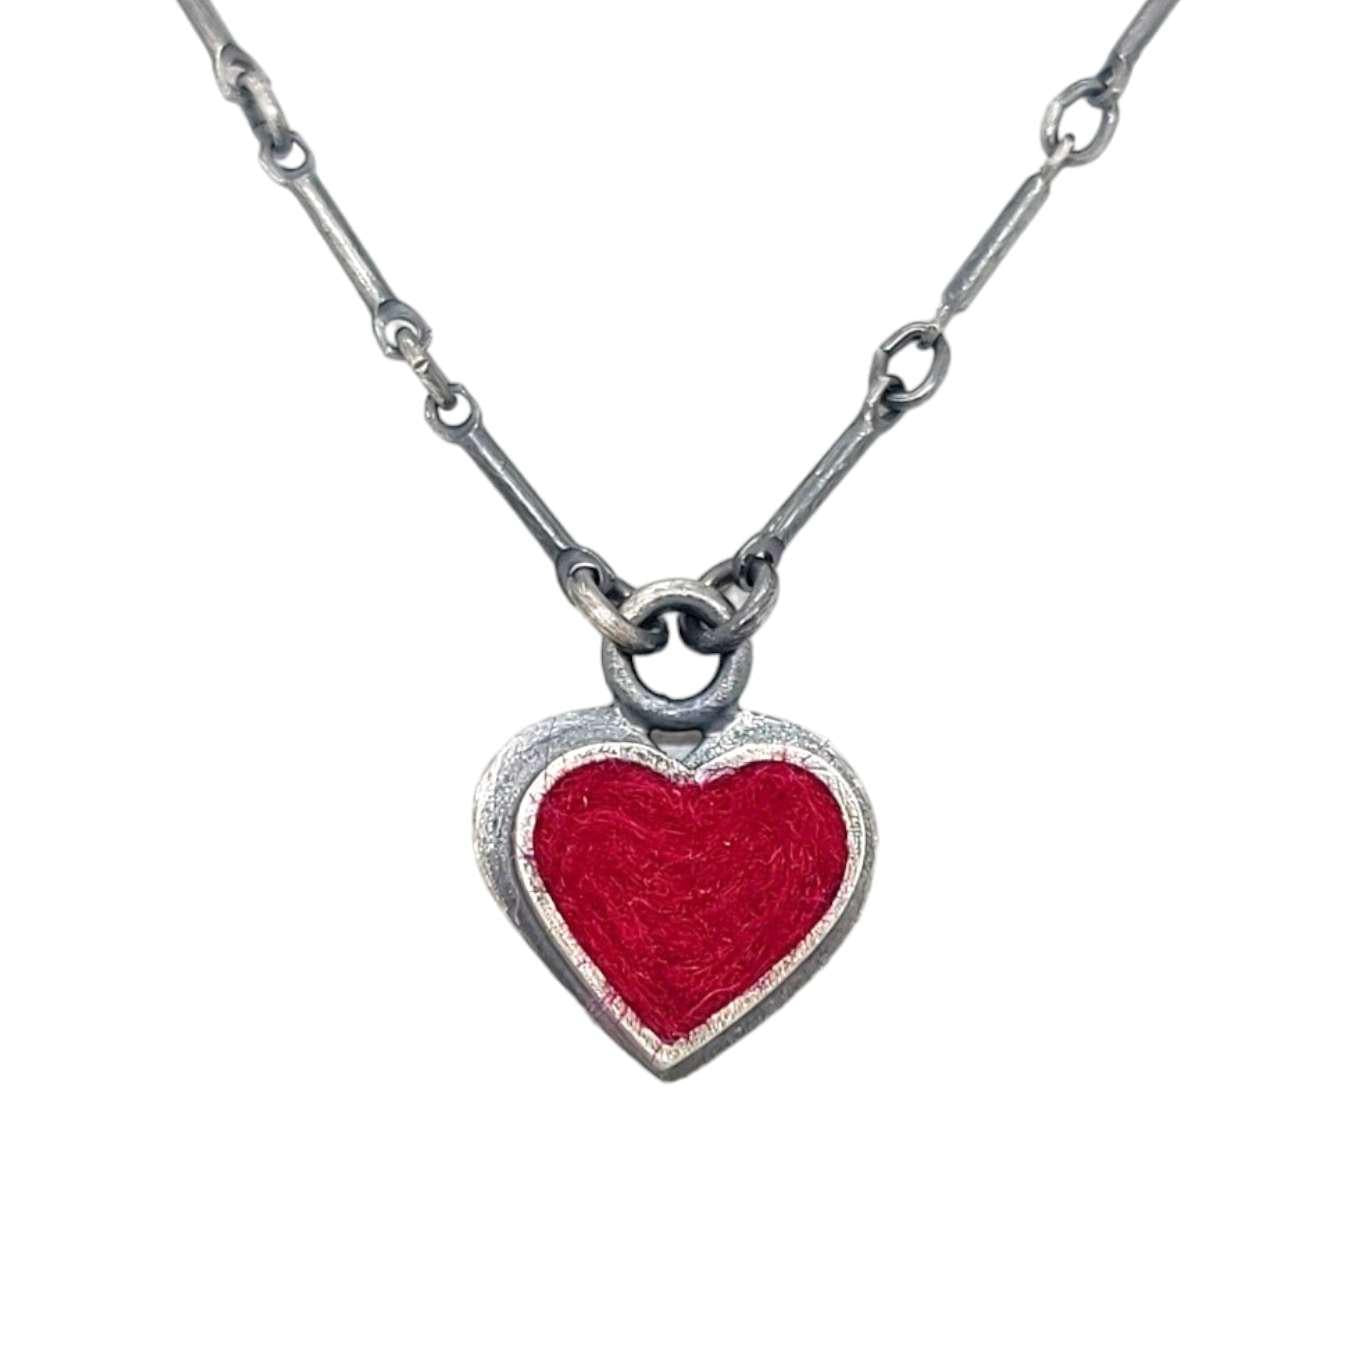 Necklace - Heart in Fuchsia Pink by Michele A. Friedman